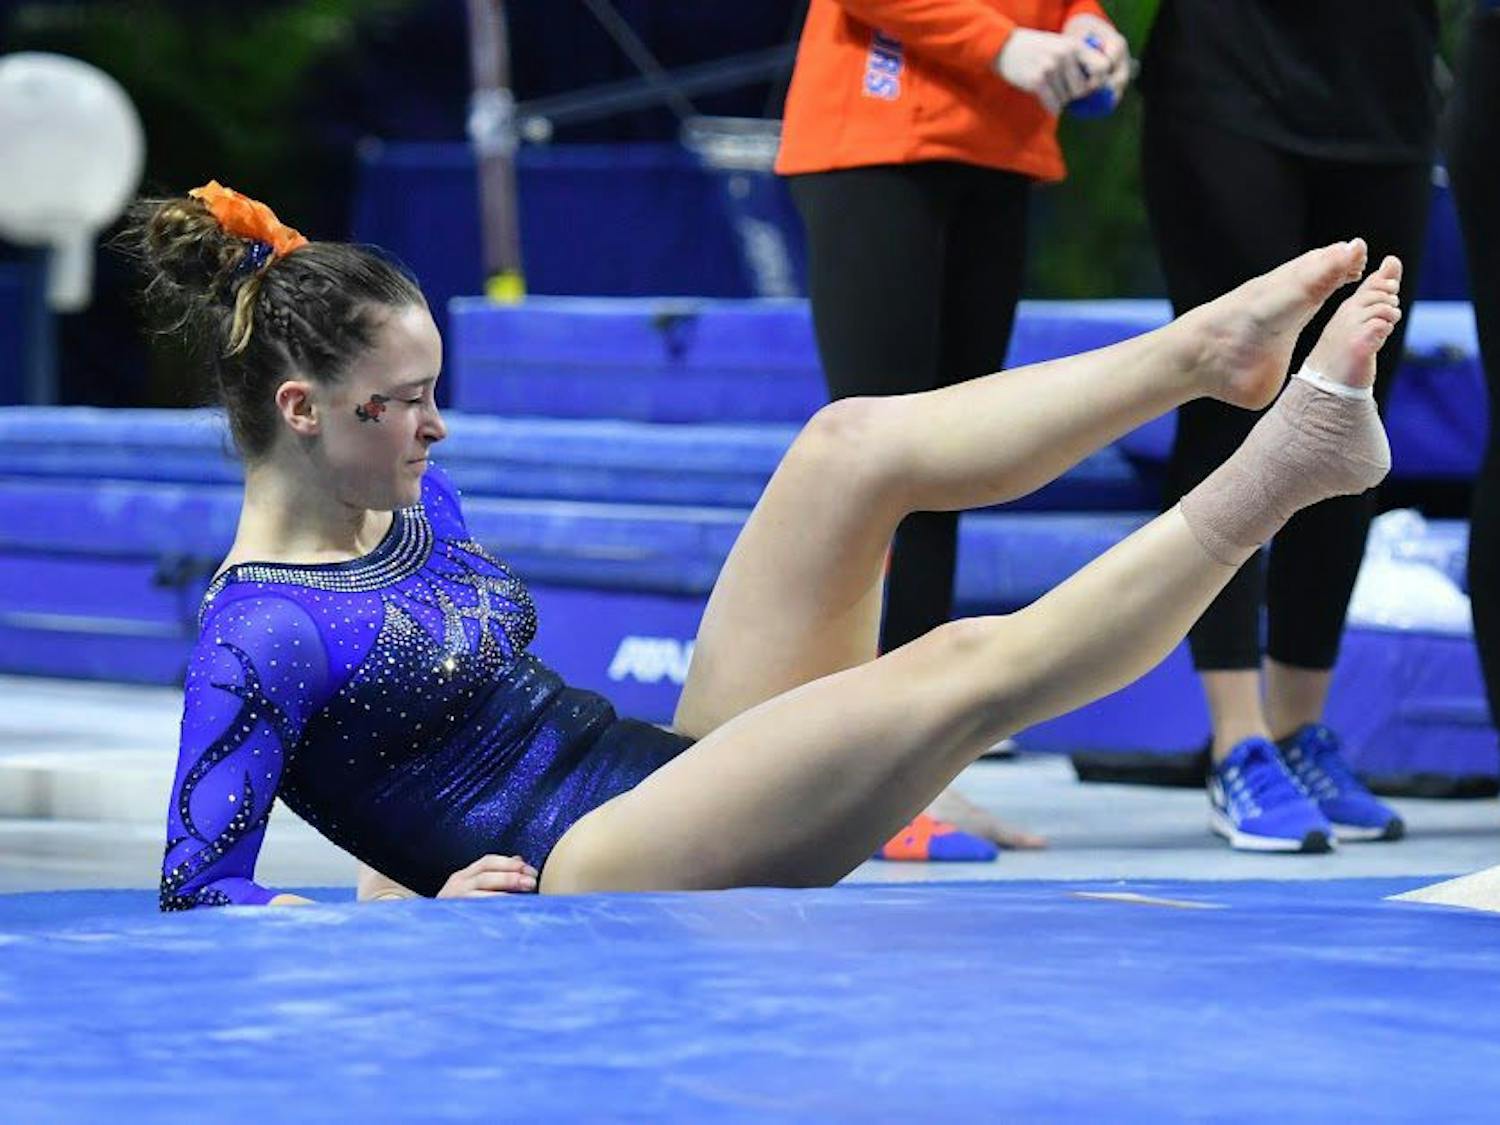 UF's Maegan Chant falls during a routine in Florida's win against Kentucky on Jan. 13, 2017, in the O'Connell Center.